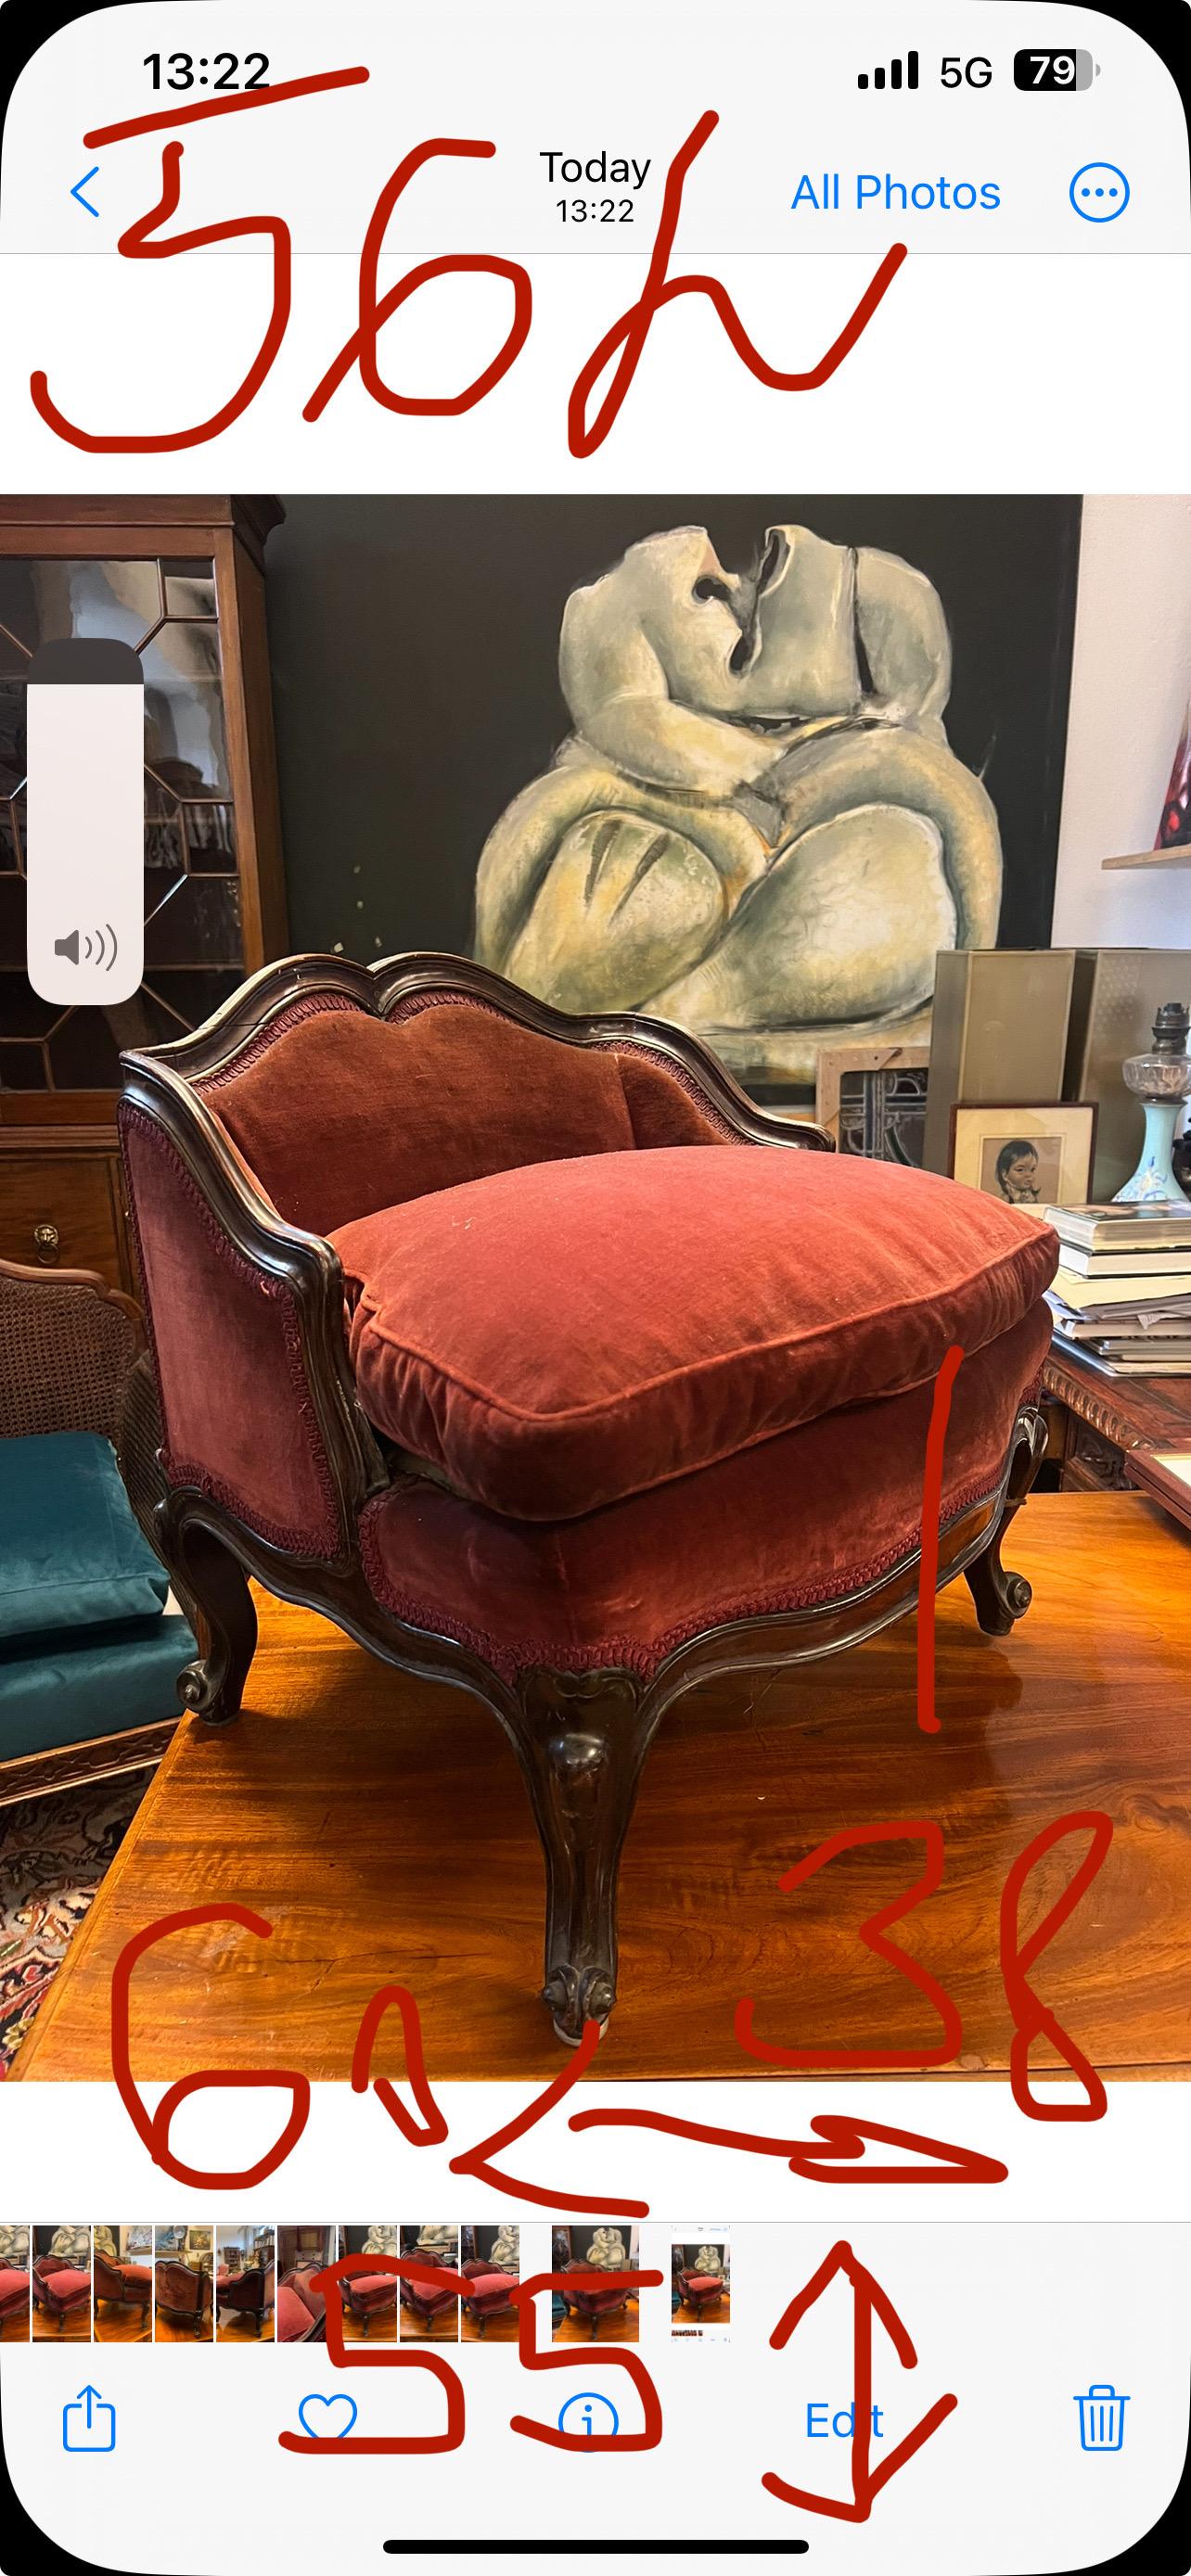 18th Century French Louis XV period mahogany hand carved foot stool or dog stool in very good authentic condition still wearing original velvet upholstery in dark red.
France, circa 1760